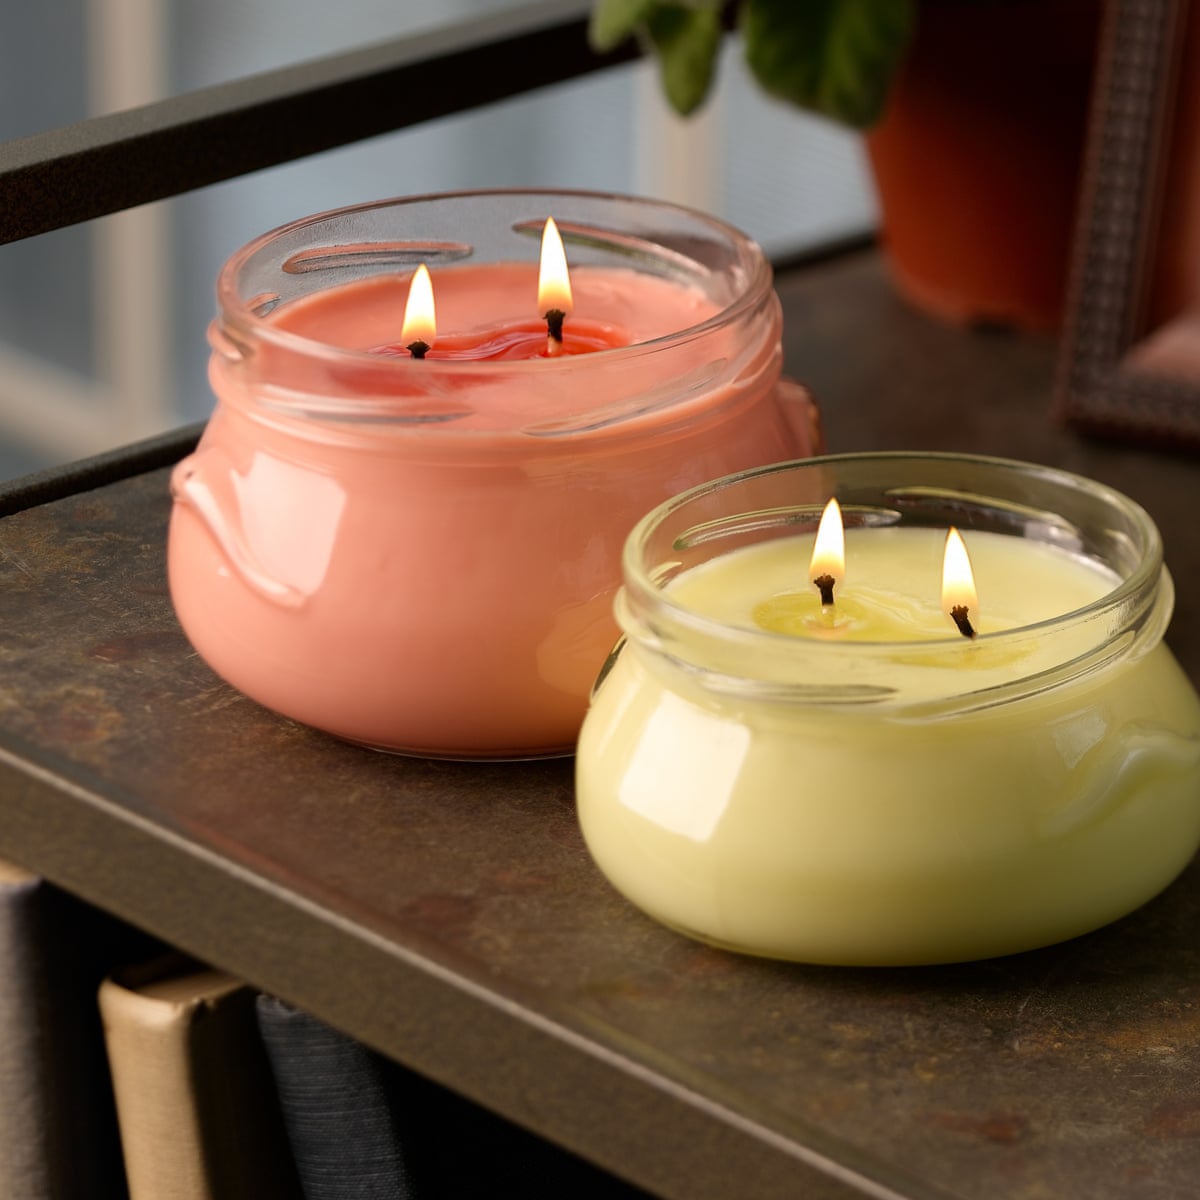 Candle Images